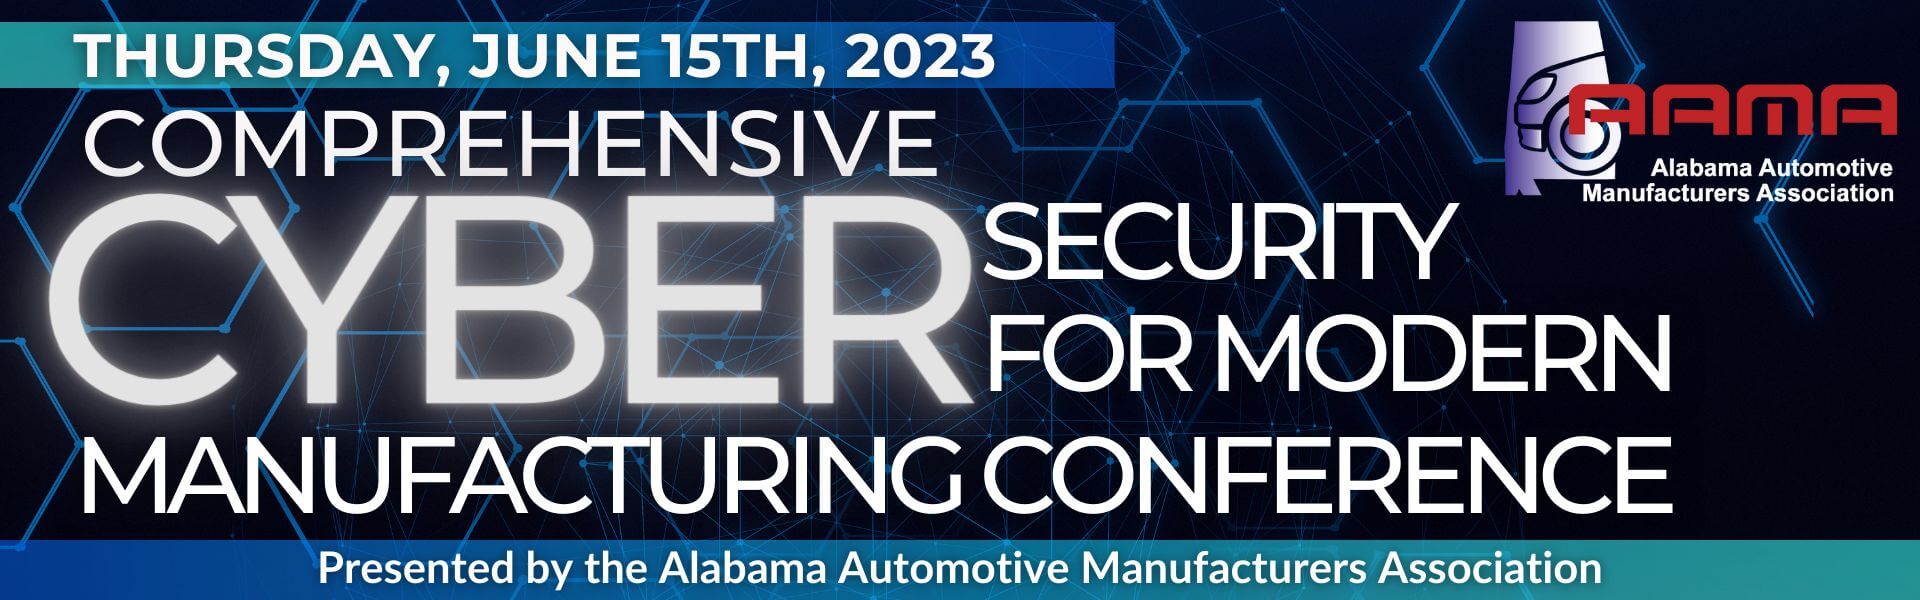 Cyber Security Conference Banner